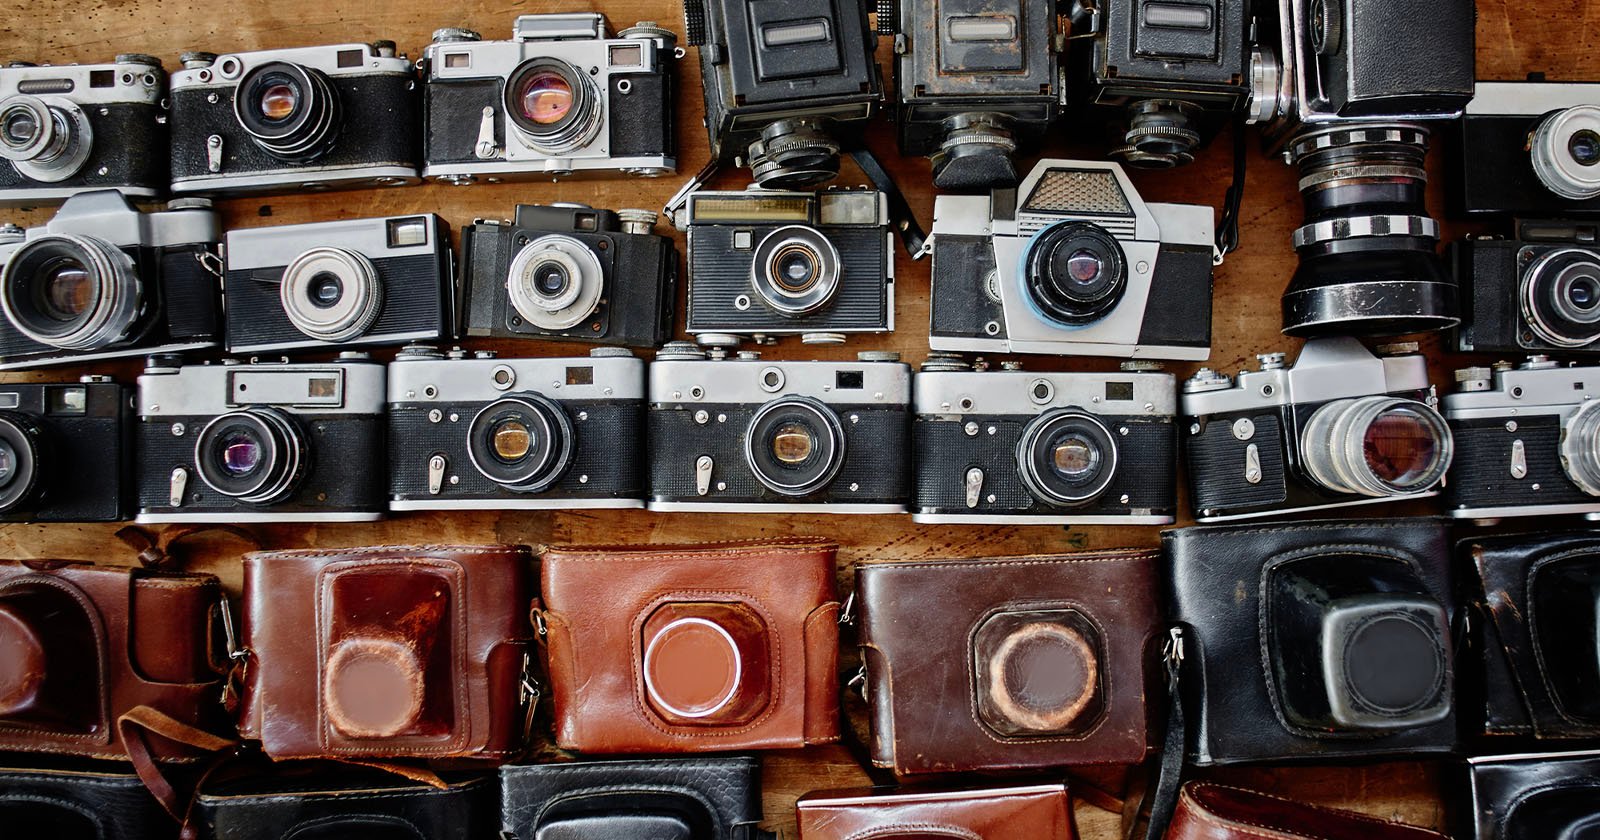  expensive flagship cameras means second-hand market expected 